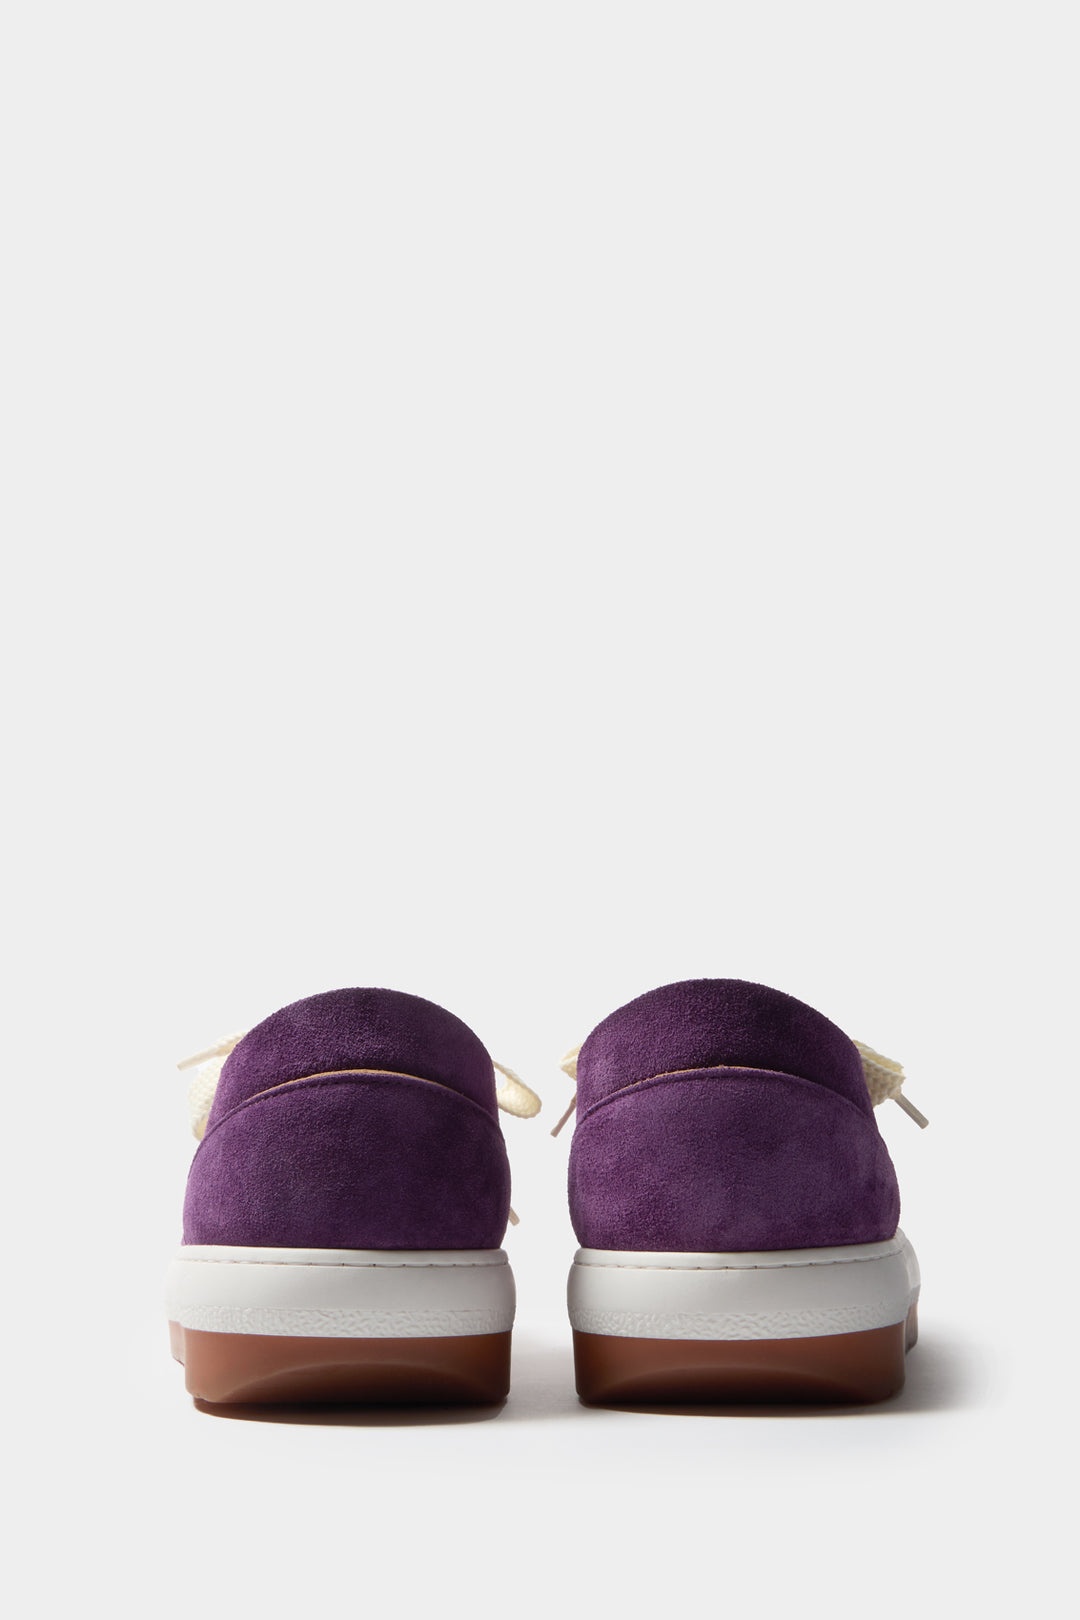 DREAMY SHOES / suede / aubergine - 3